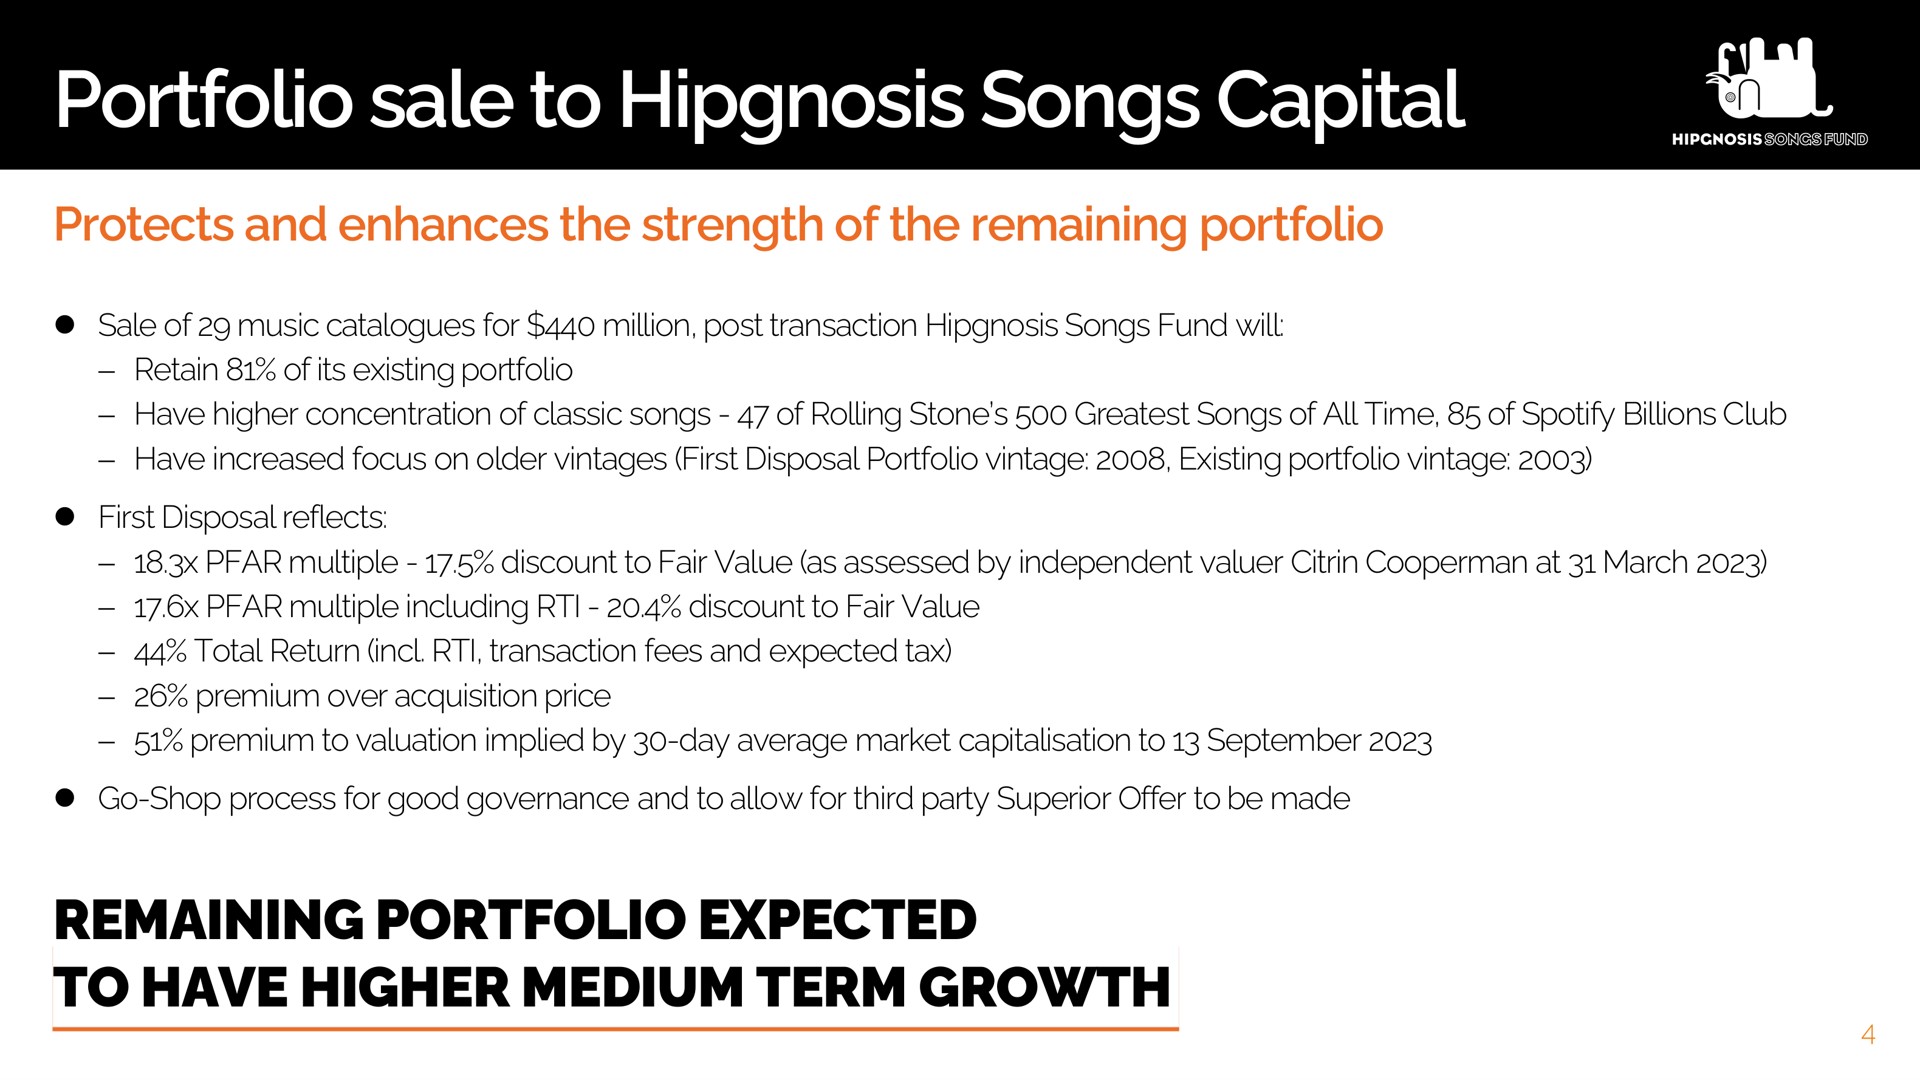 portfolio sale to songs capital remaining expected have higher medium term growth | Hipgnosis Songs Fund